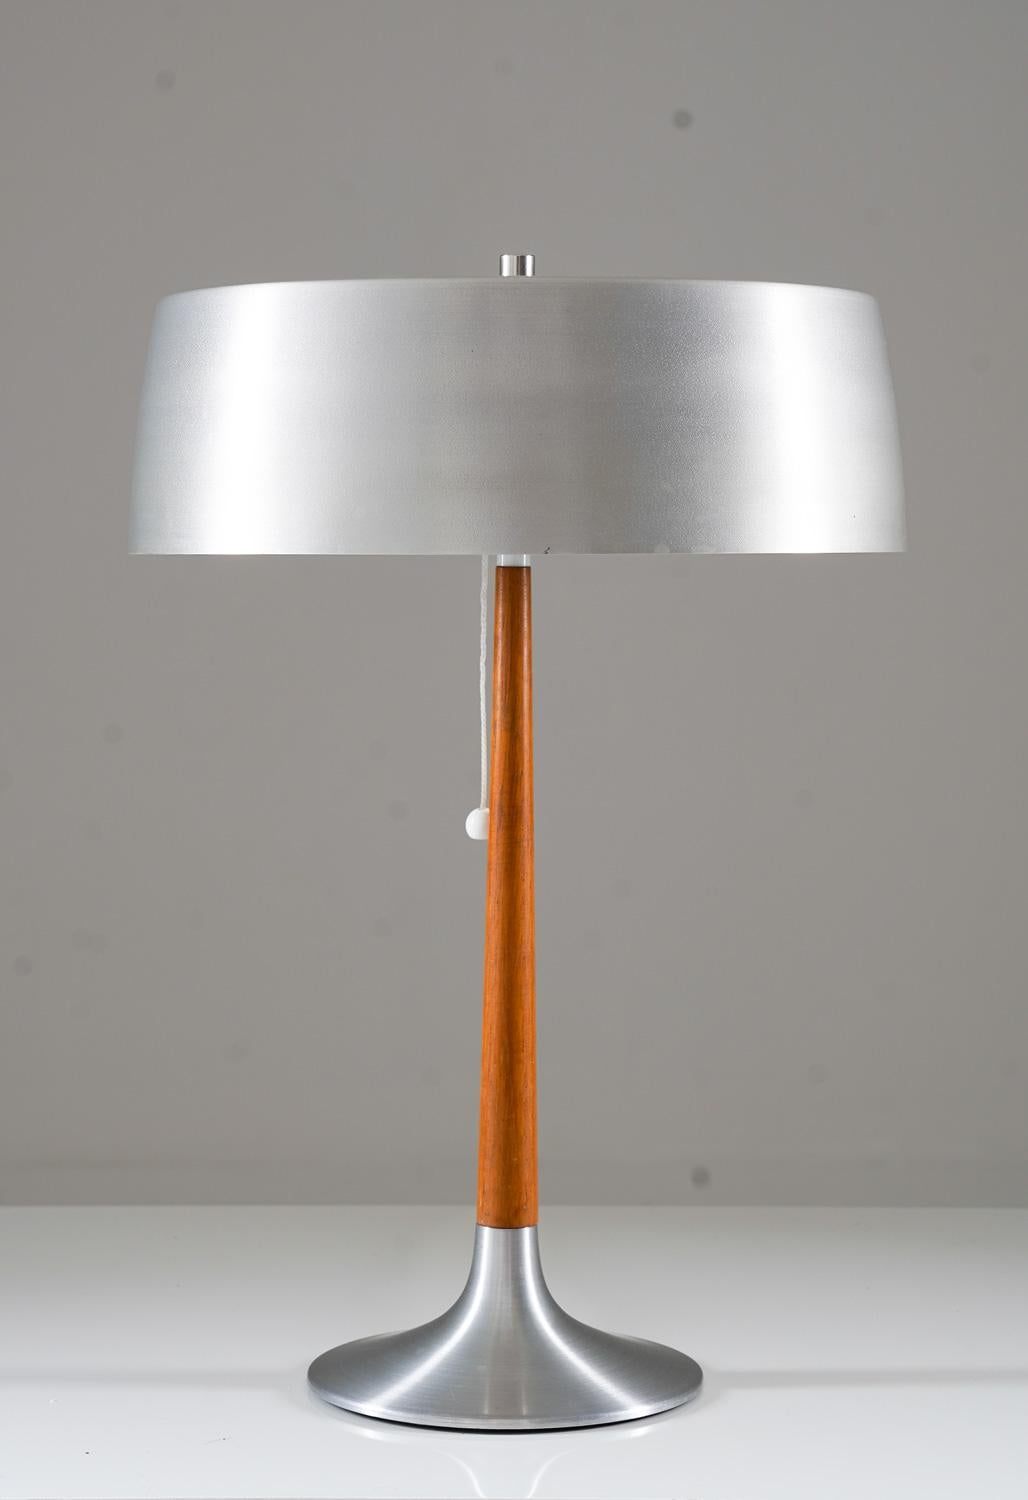 This table lamp by ASEA is a charming piece of lighting from the 1960s, hailing from Sweden. This lamp boasts a sleek and stylish design, crafted with brushed aluminum and teak. 

In terms of its condition, the lamp is in very good condition, with